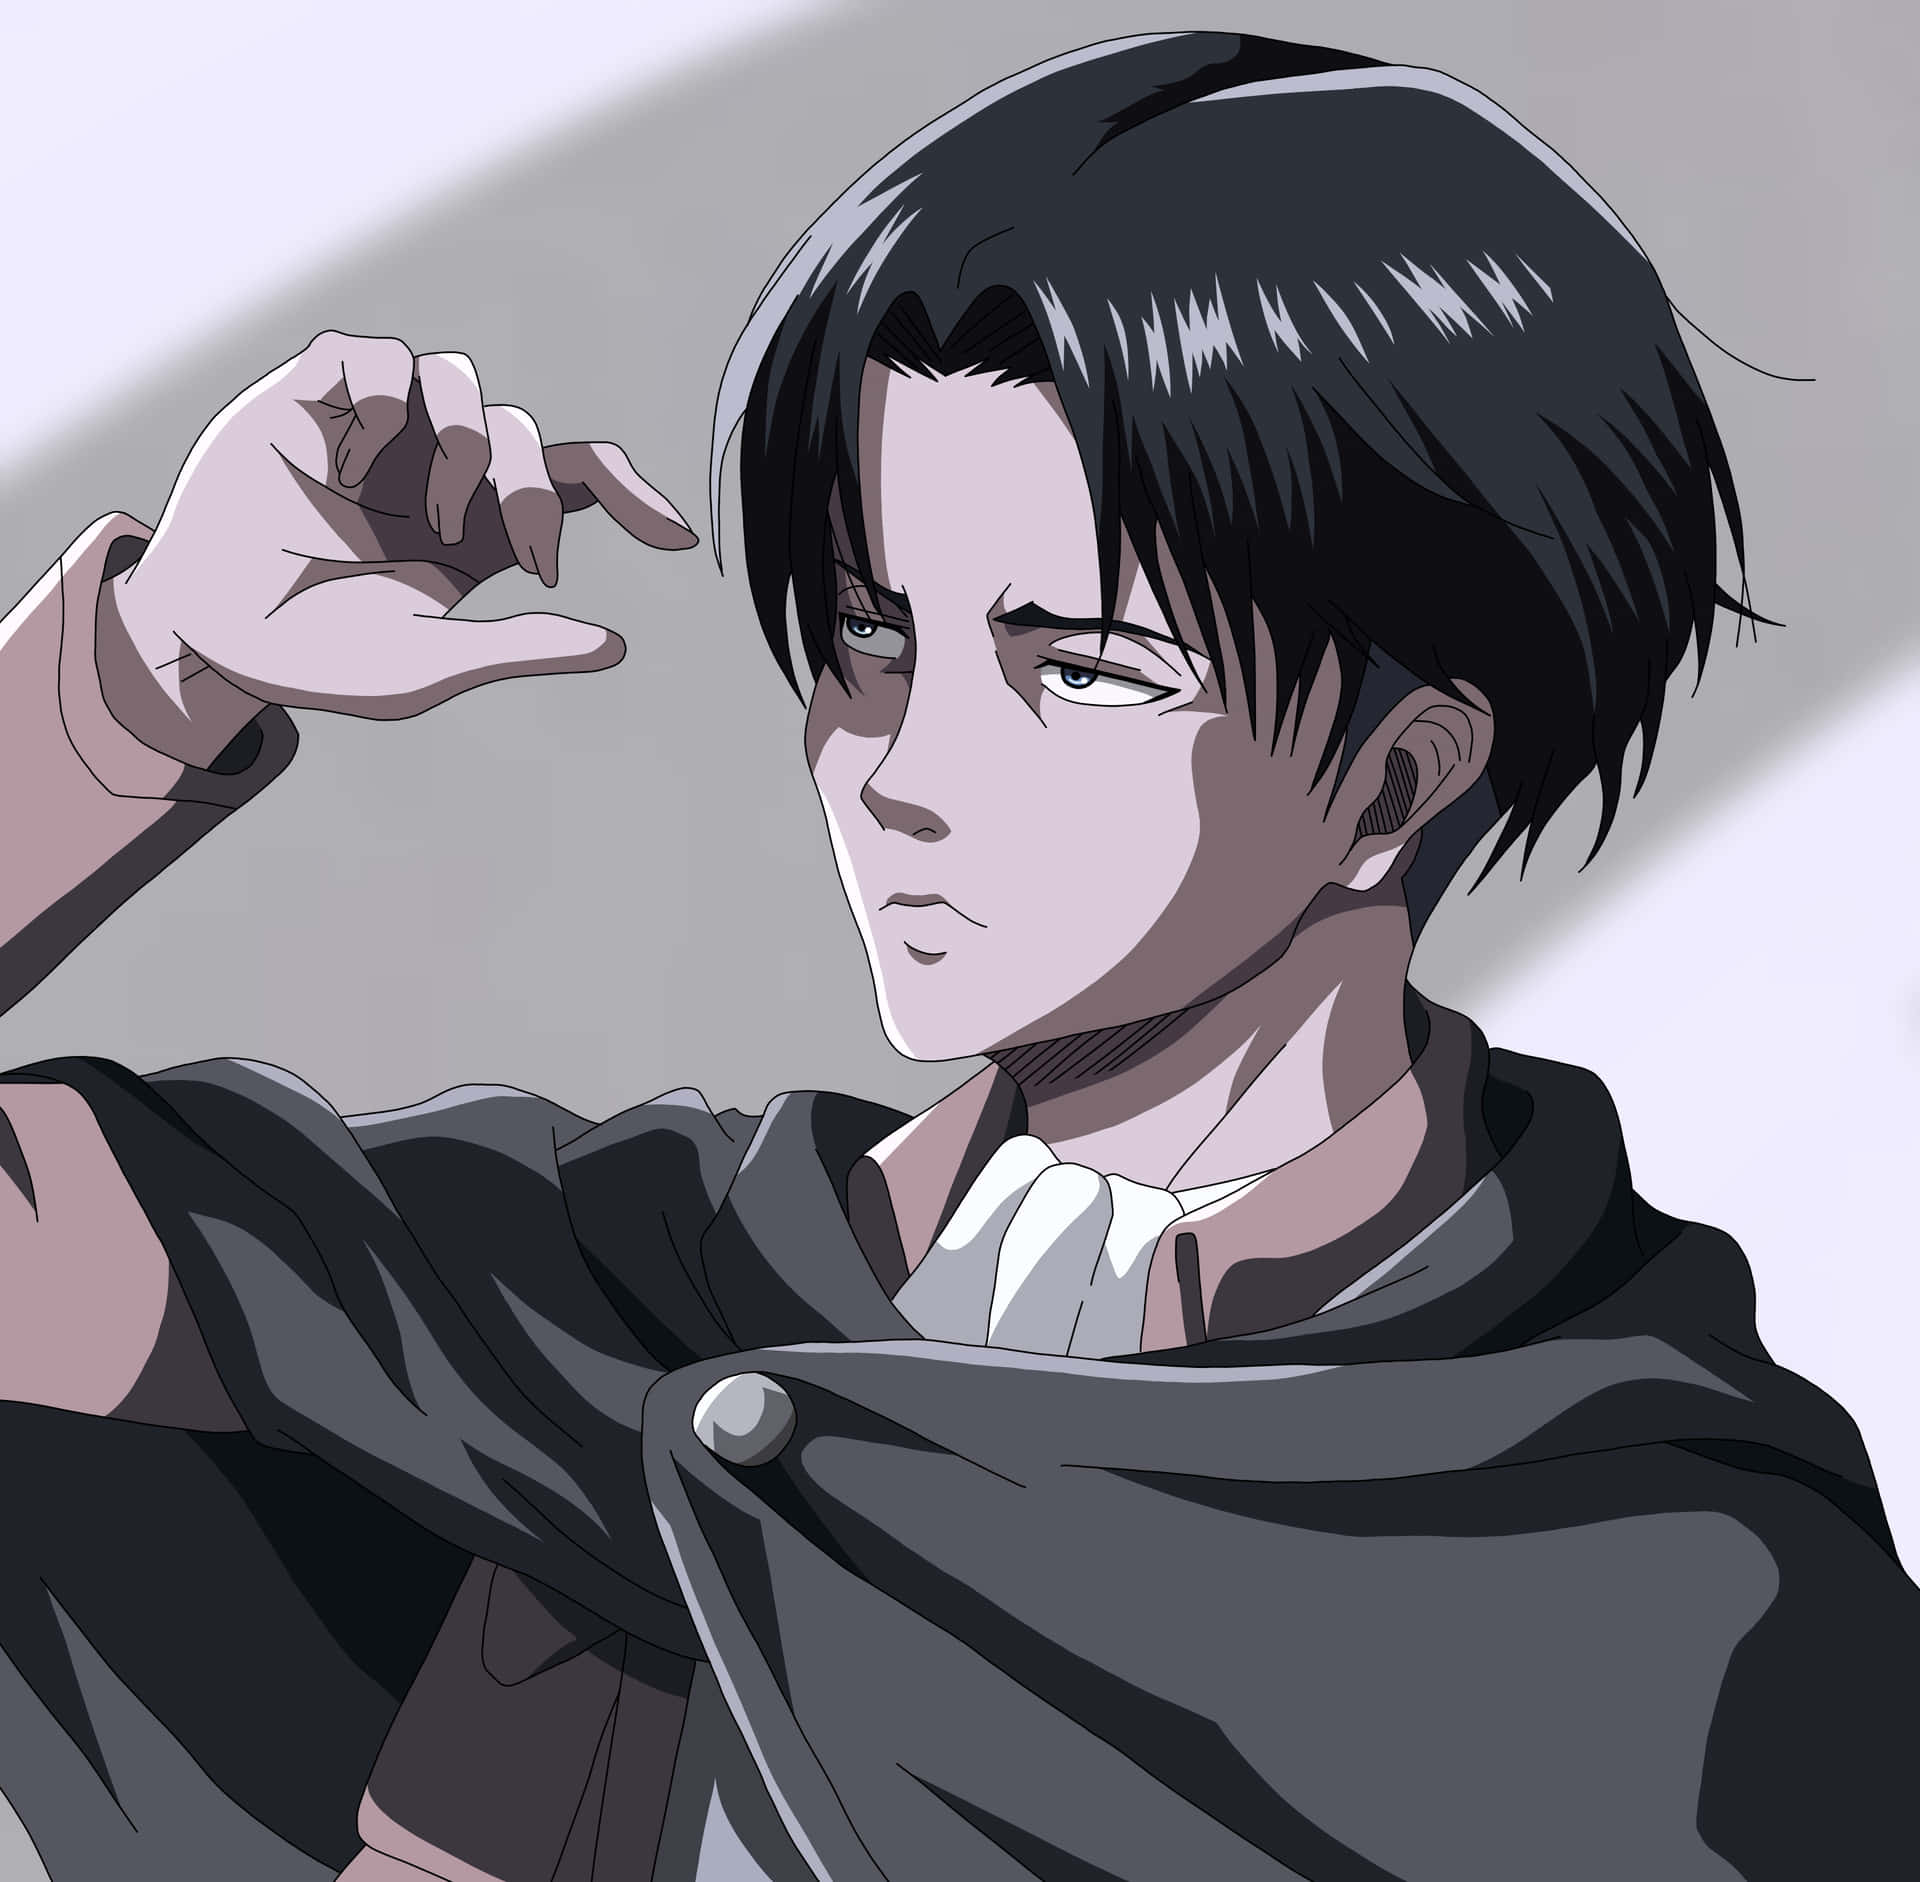 "Determined Levi Pfp with Uplifted Hand" Wallpaper